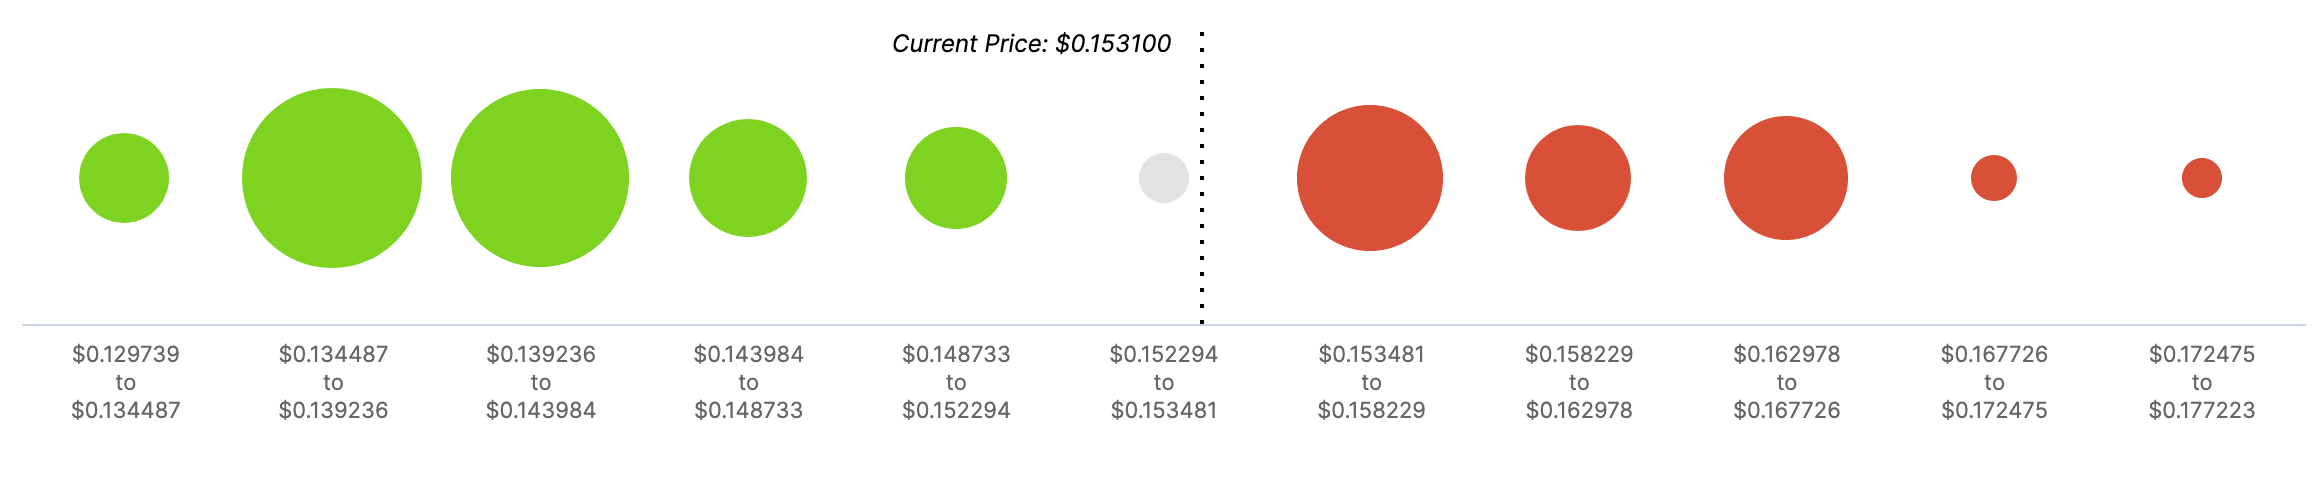 ADA In/Out of the Money Around Price